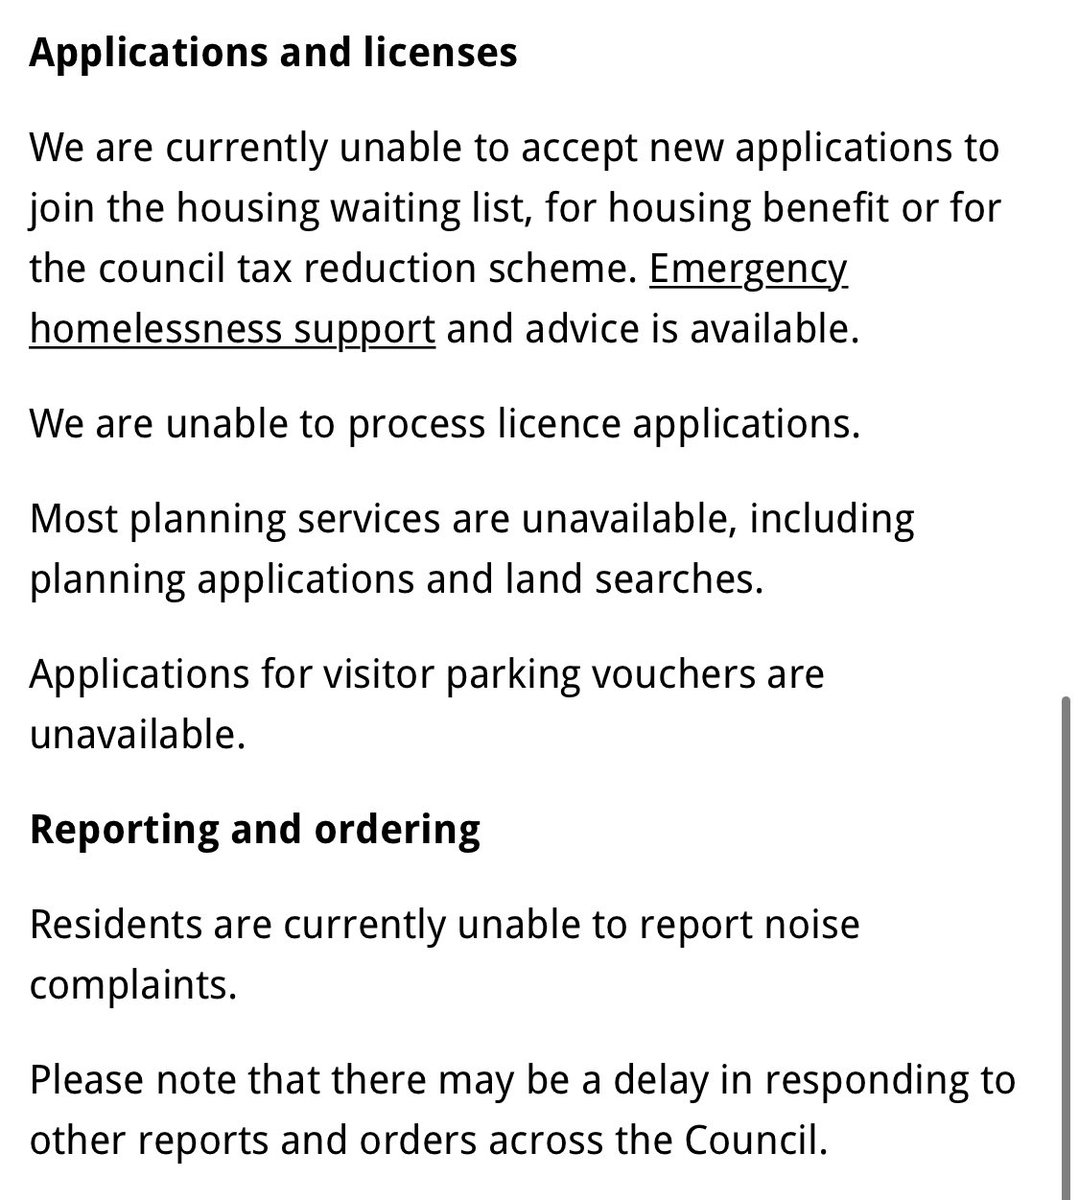  Hackney Council has confirmed it is unable to pay housing benefit to residents who need it as a result of the cyber attack. This is going to affect tens of thousands of people, who in a worst case scenario might face eviction and homelessness. https://hackney.gov.uk/homelessness/ 